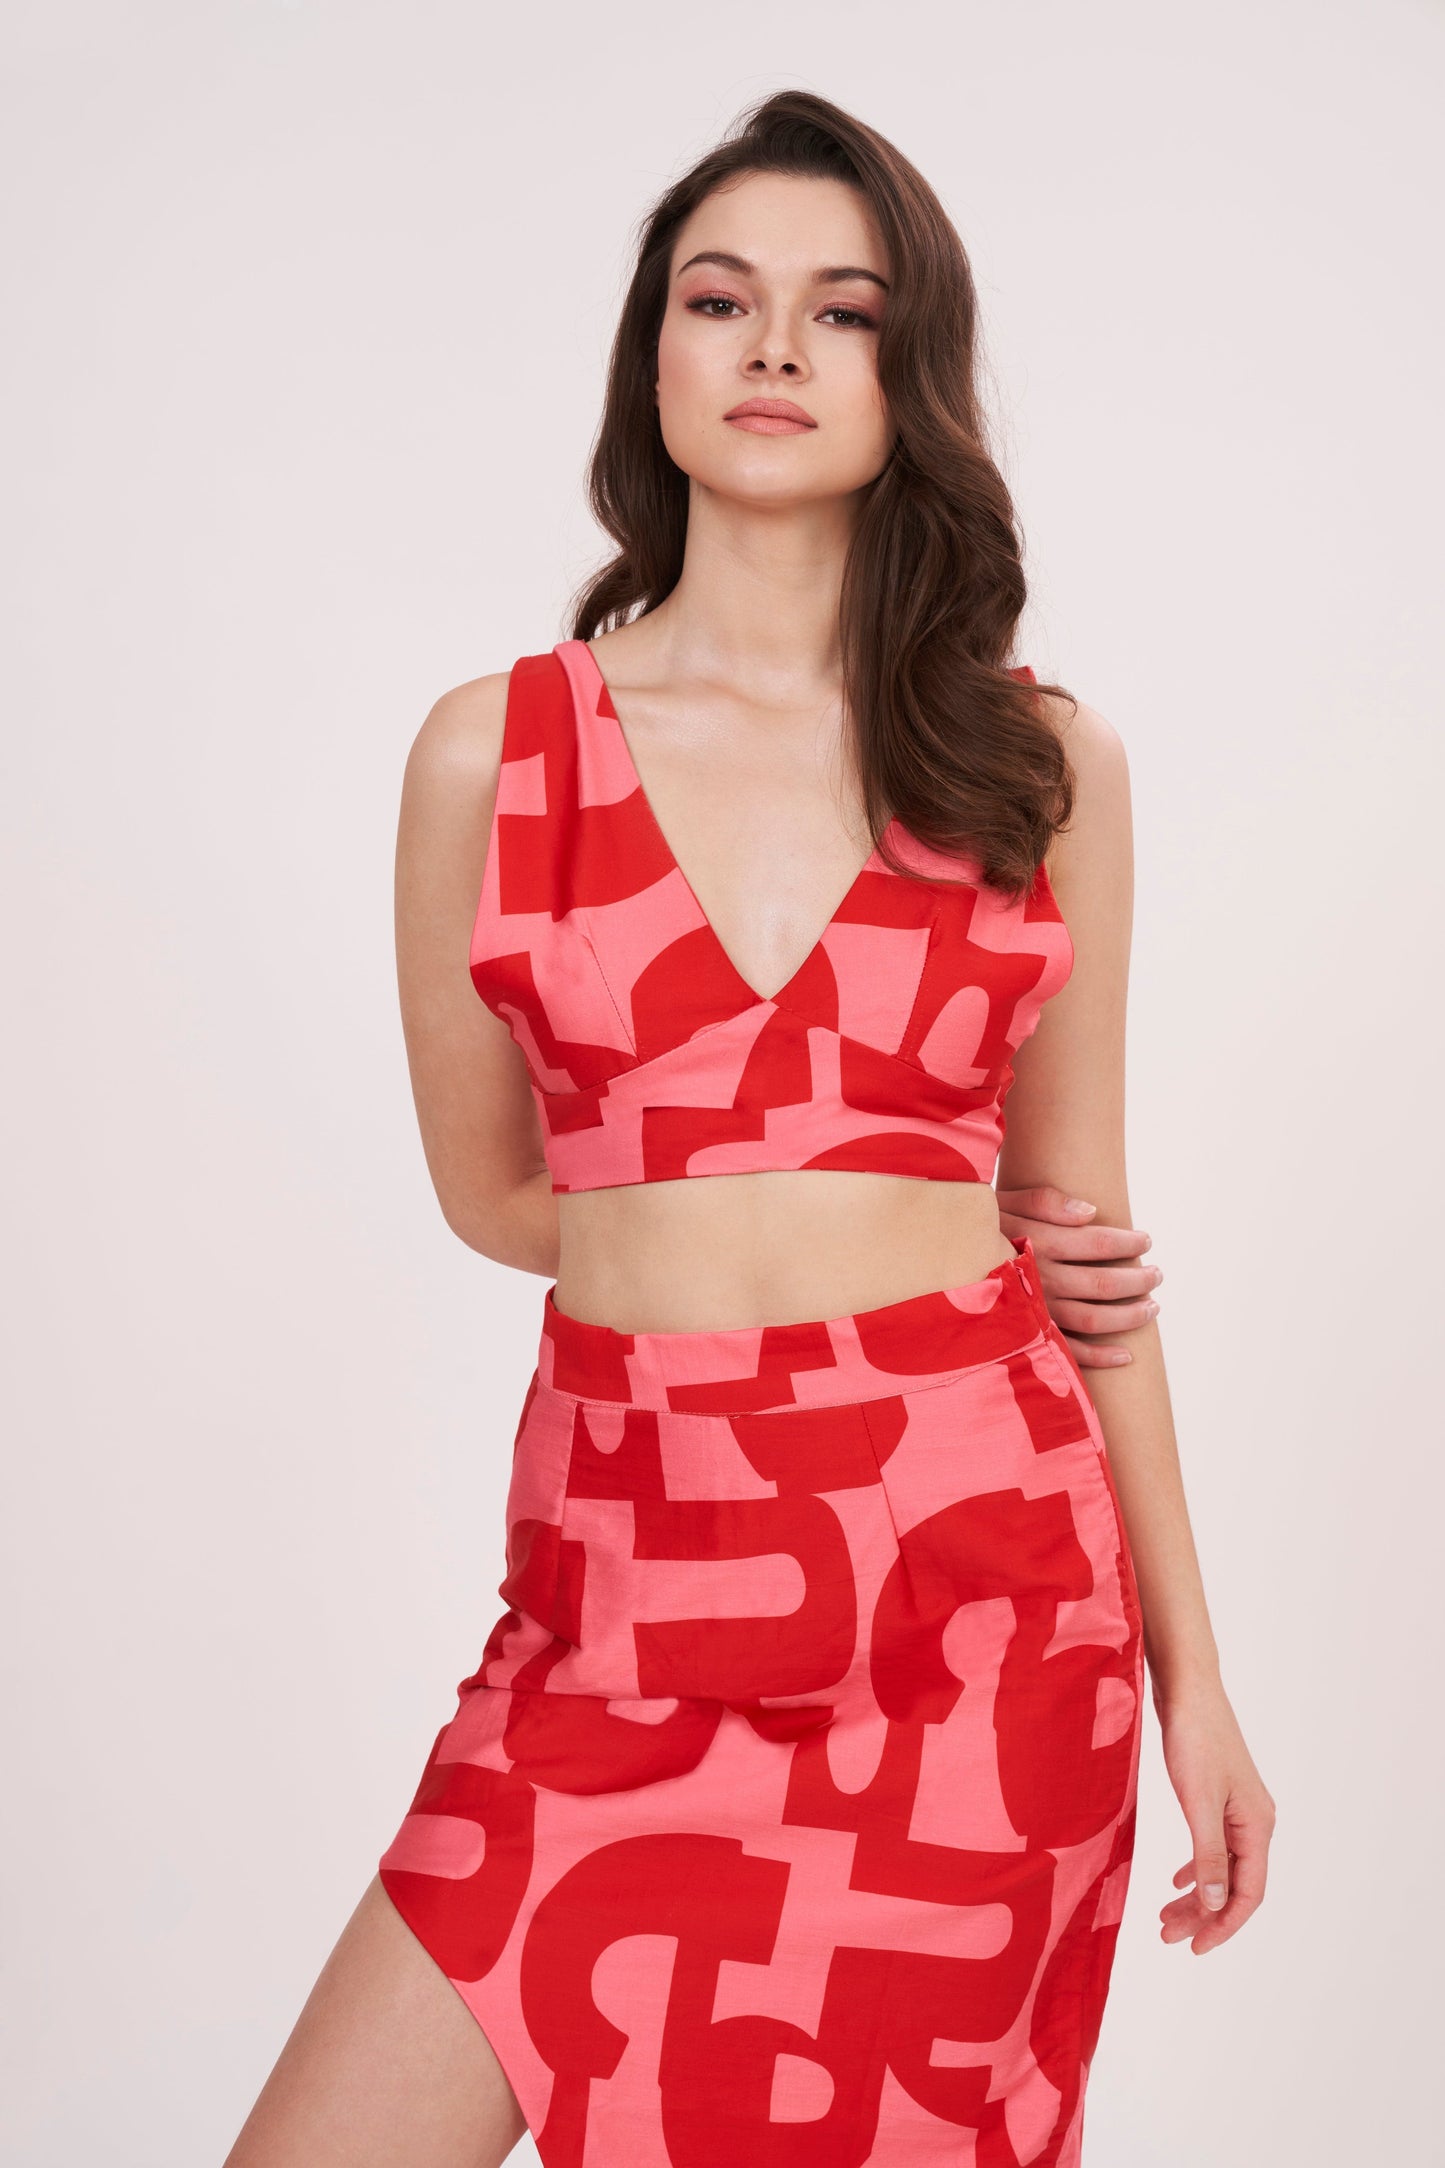 Summer v-neck crop top made from muslin fabric with intricate geometric design. 